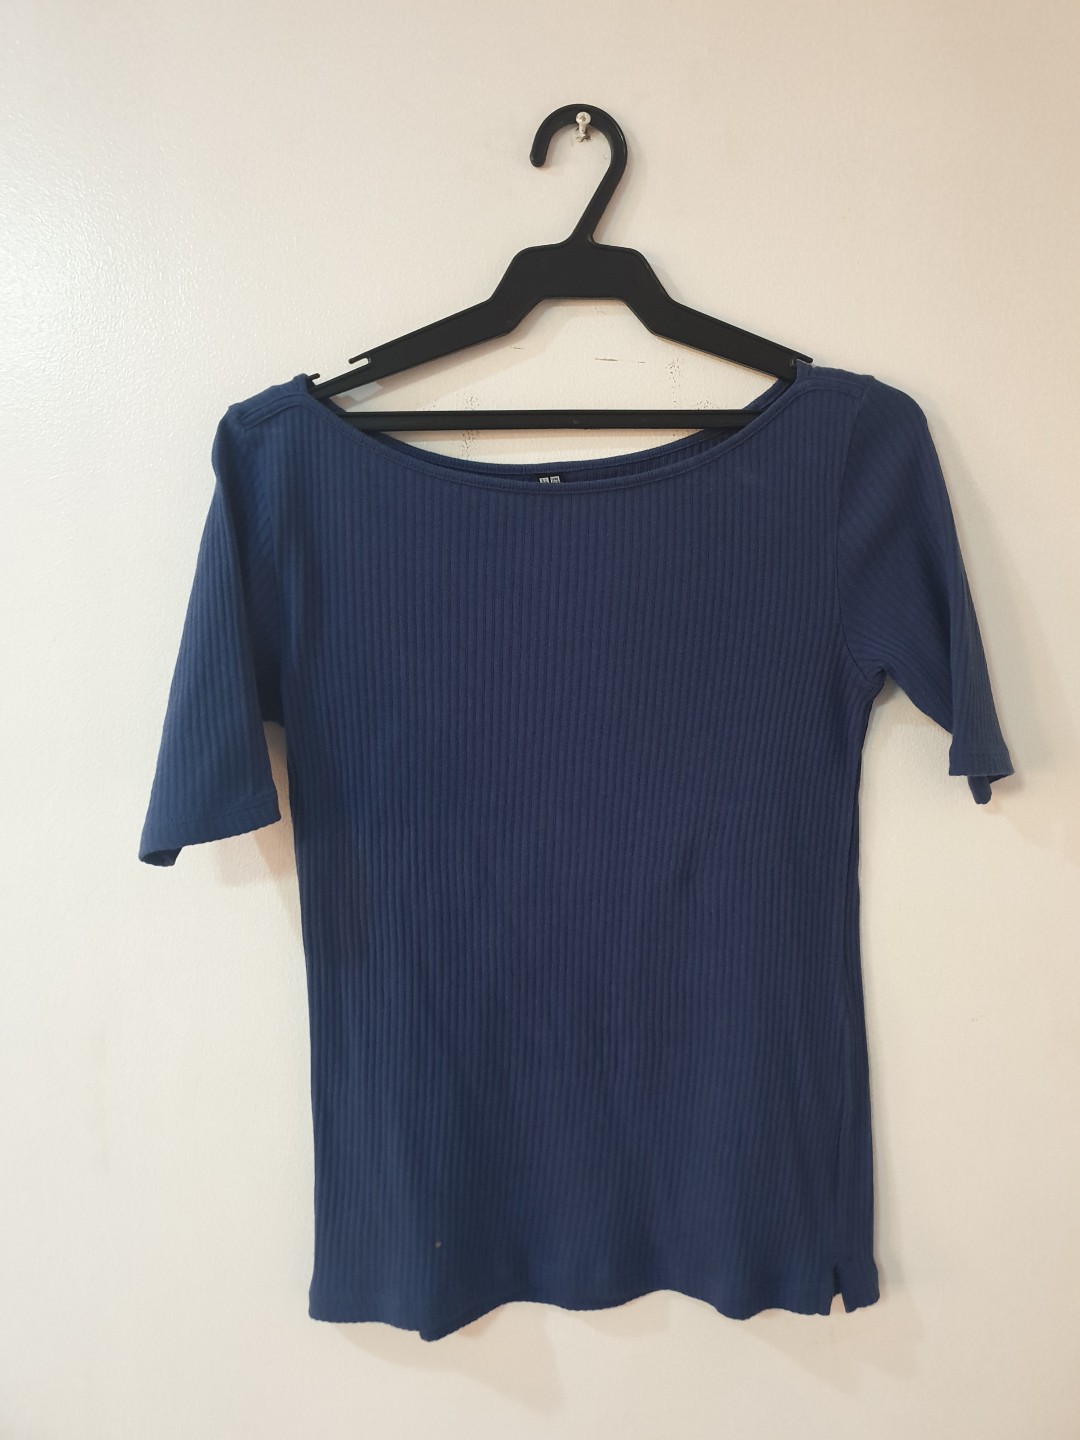 Uniqlo Ribbed Boat Neck Top, Women's Fashion, Tops, Sleeveless on Carousell